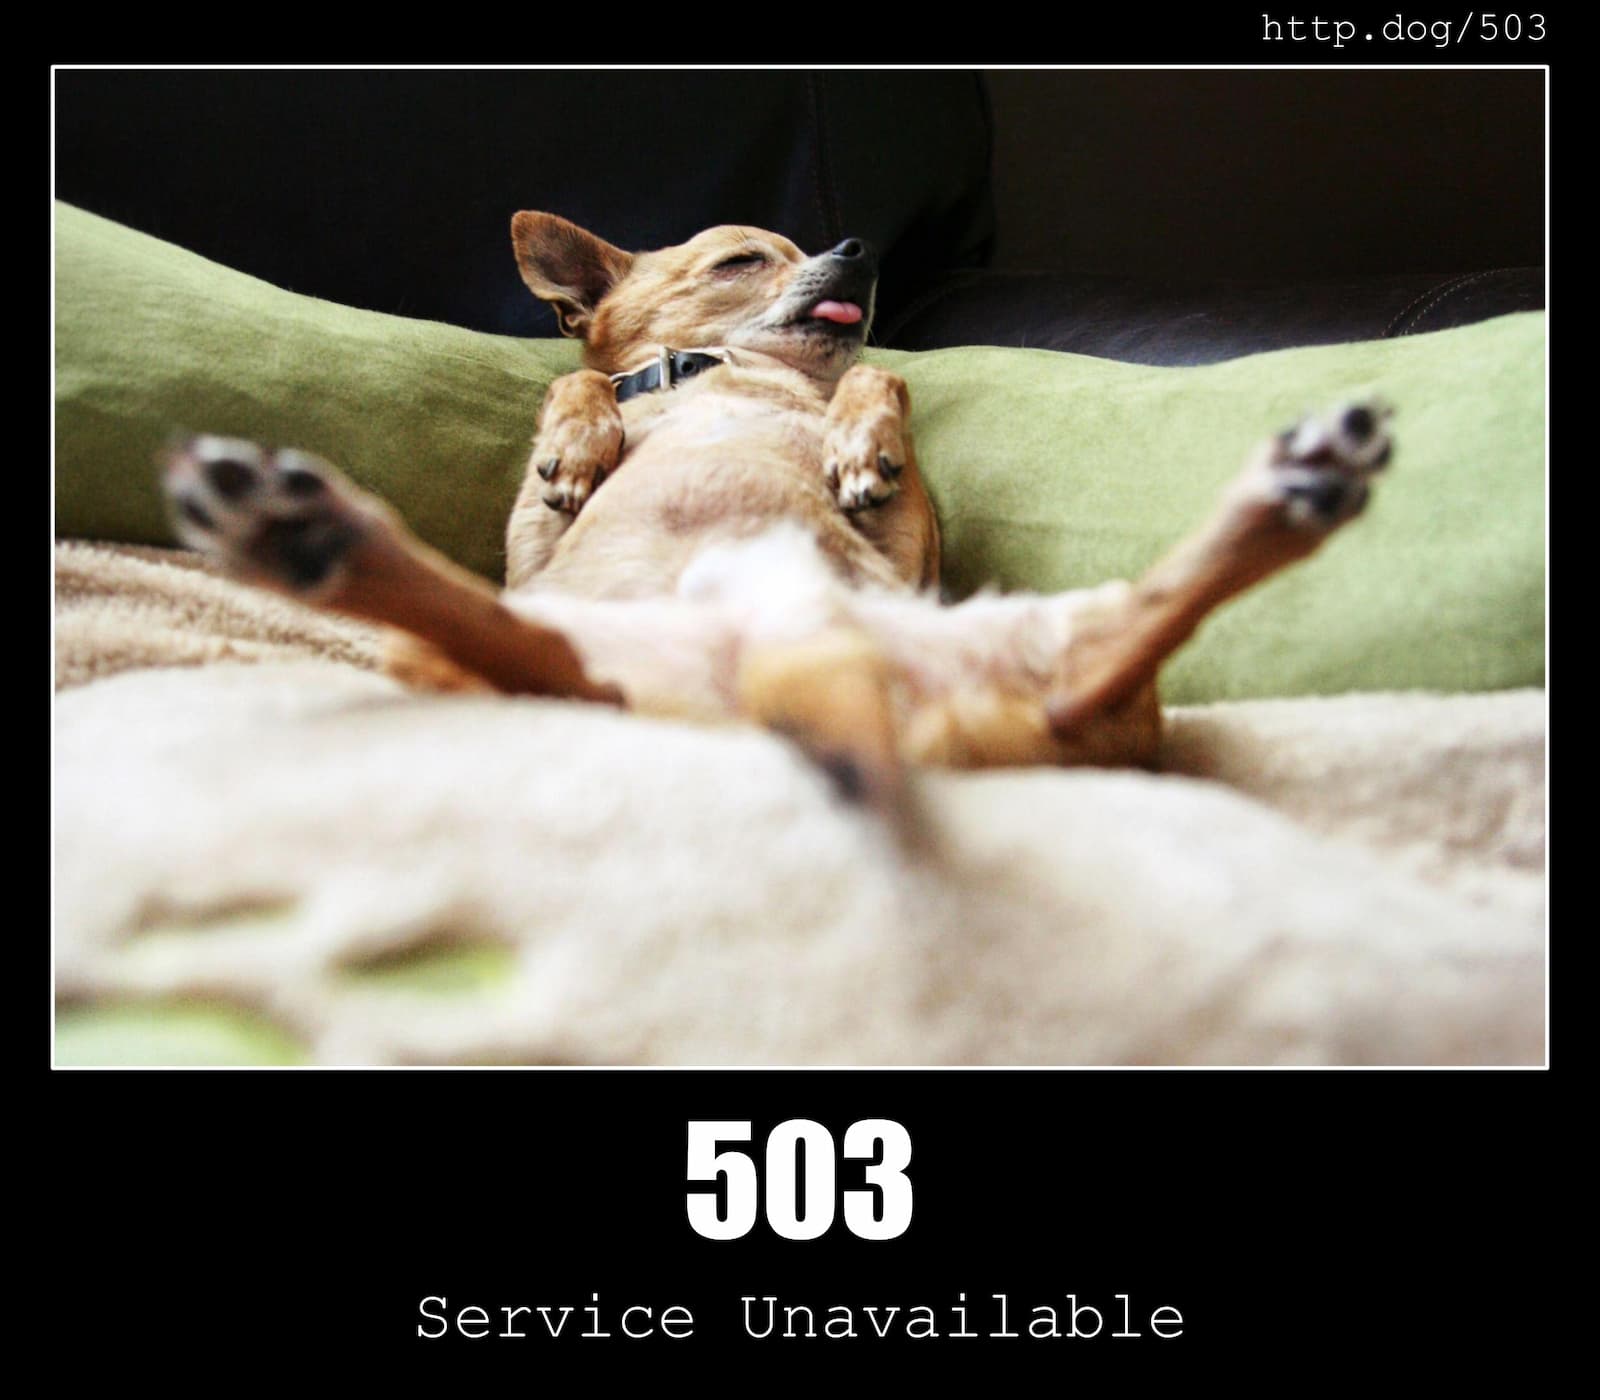 HTTP Status Code 503 Service Unavailable & Dogs